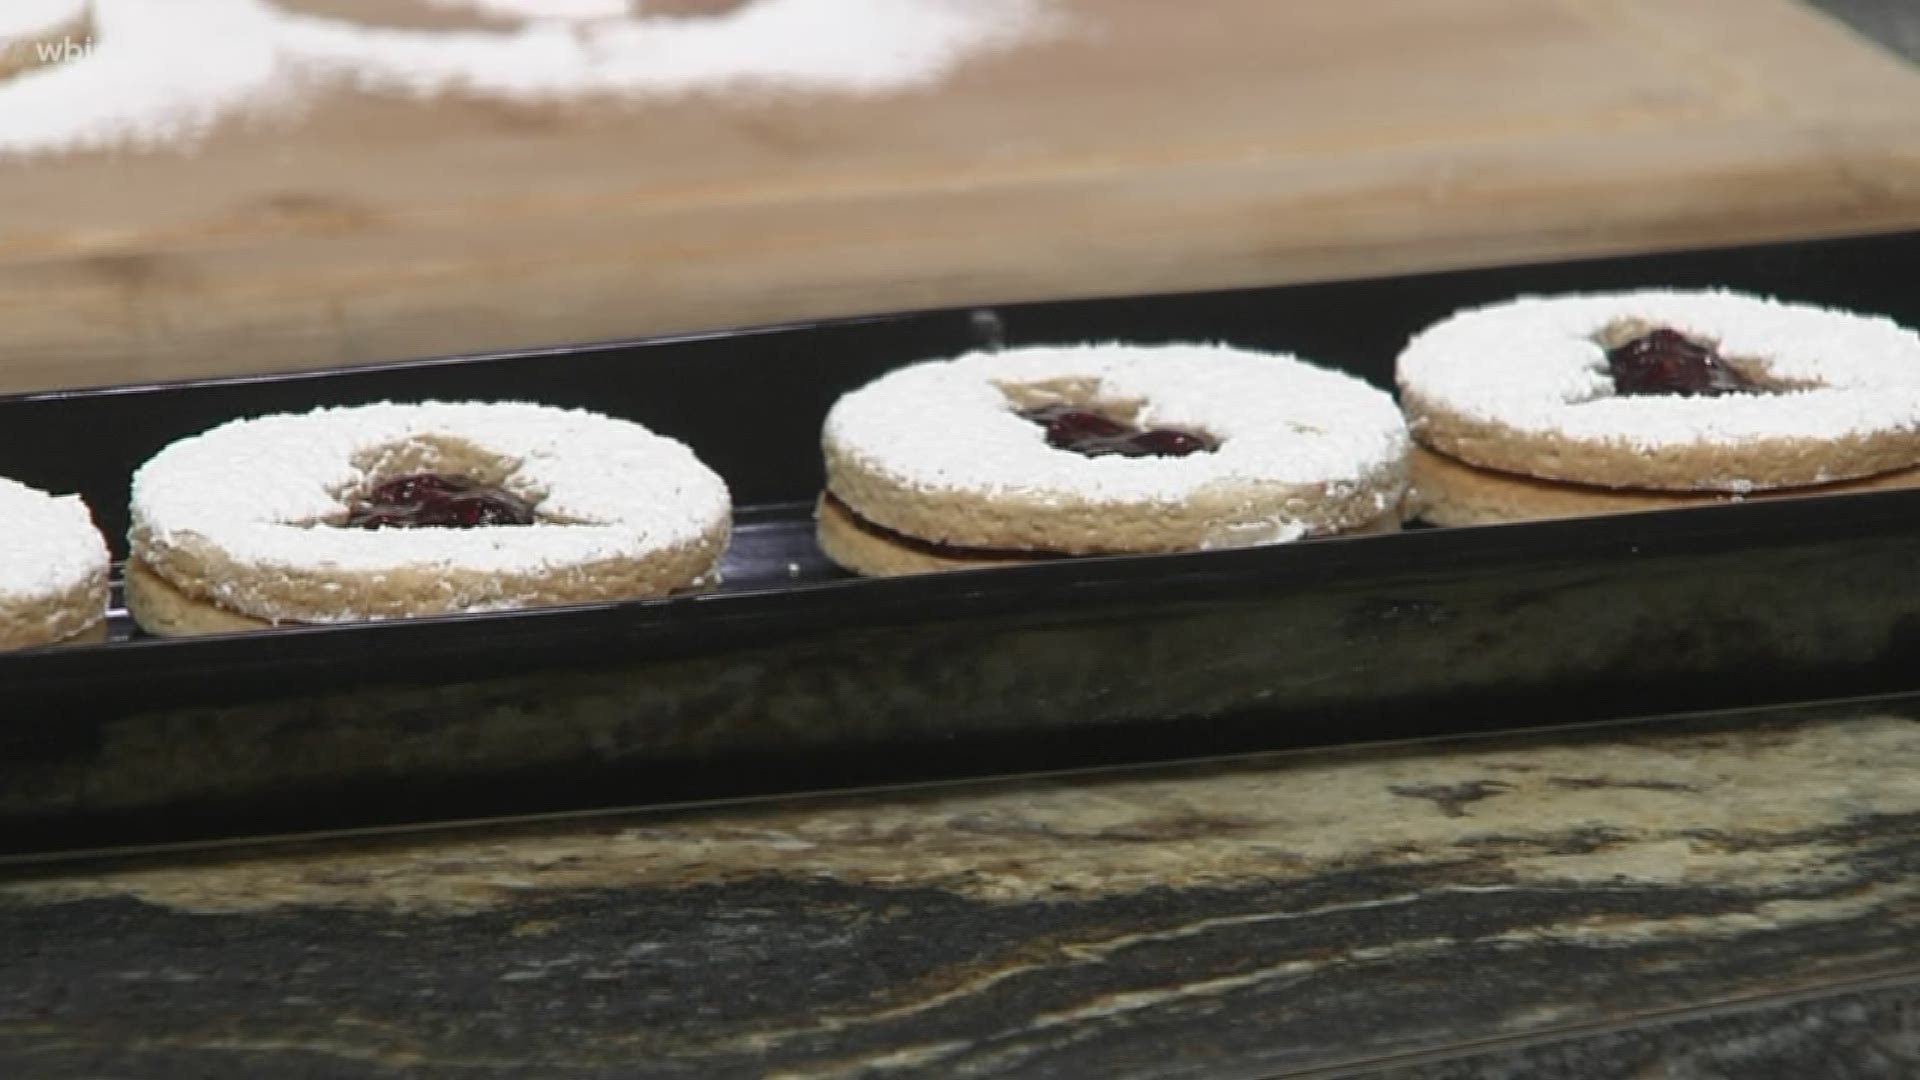 Mahasti Vafaie from Tomato Head joins us in the kitchen to make Linzer cookies.